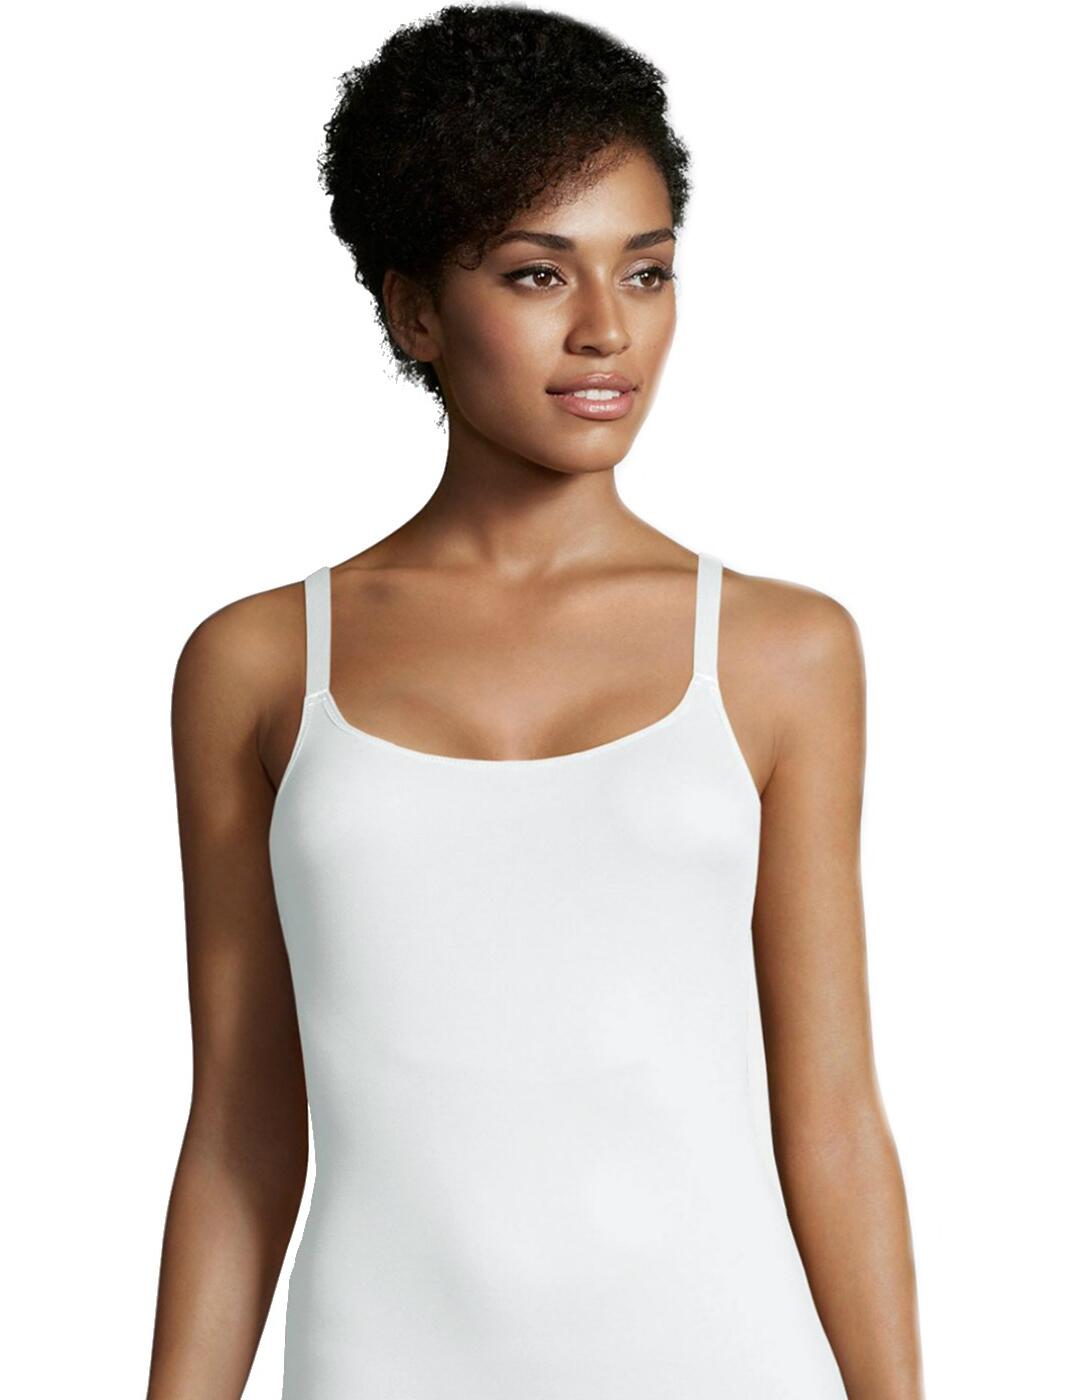 Maidenform Women's Firm Control Shaping Tank Top with Cool Comfort Fabric